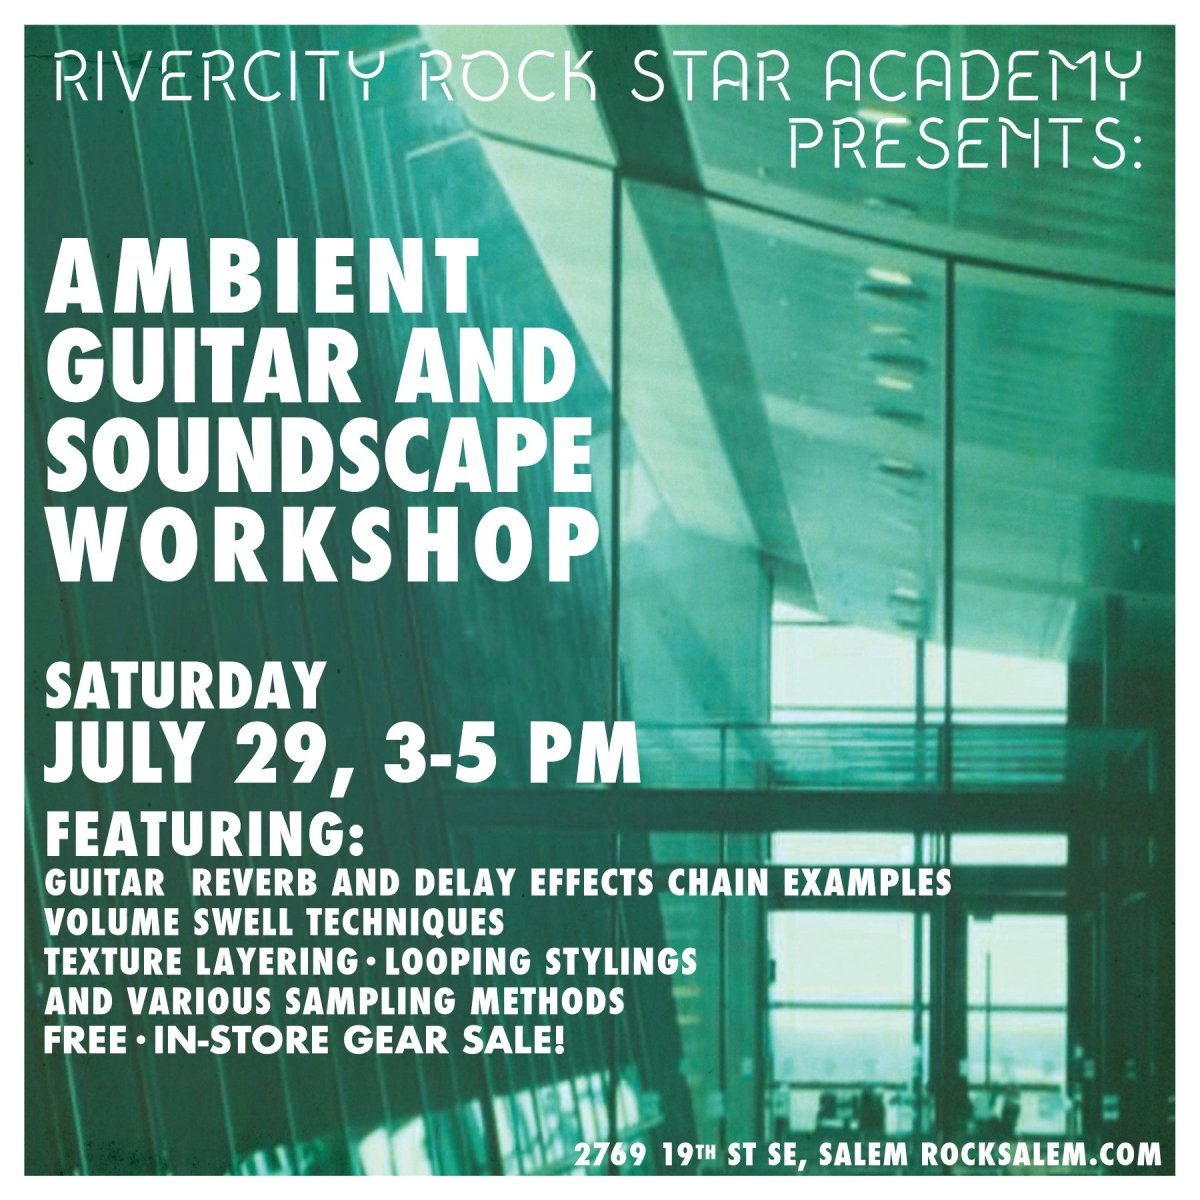 Free Ambient Guitar Effects Workshop Saturday 7/29 - RiverCity Rock Star Academy Music Store